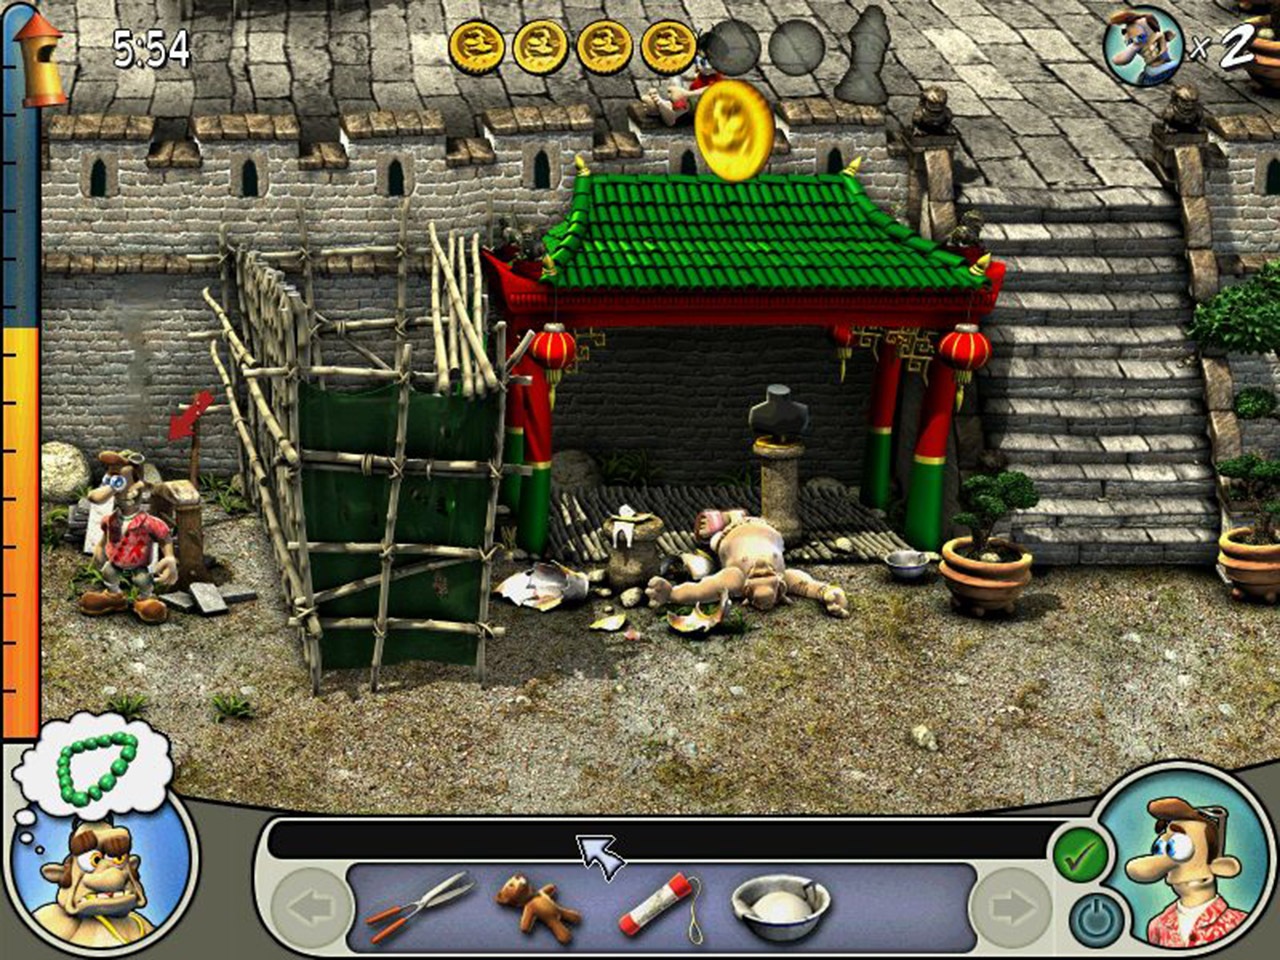 neighbours from hell 2 free download full game for android